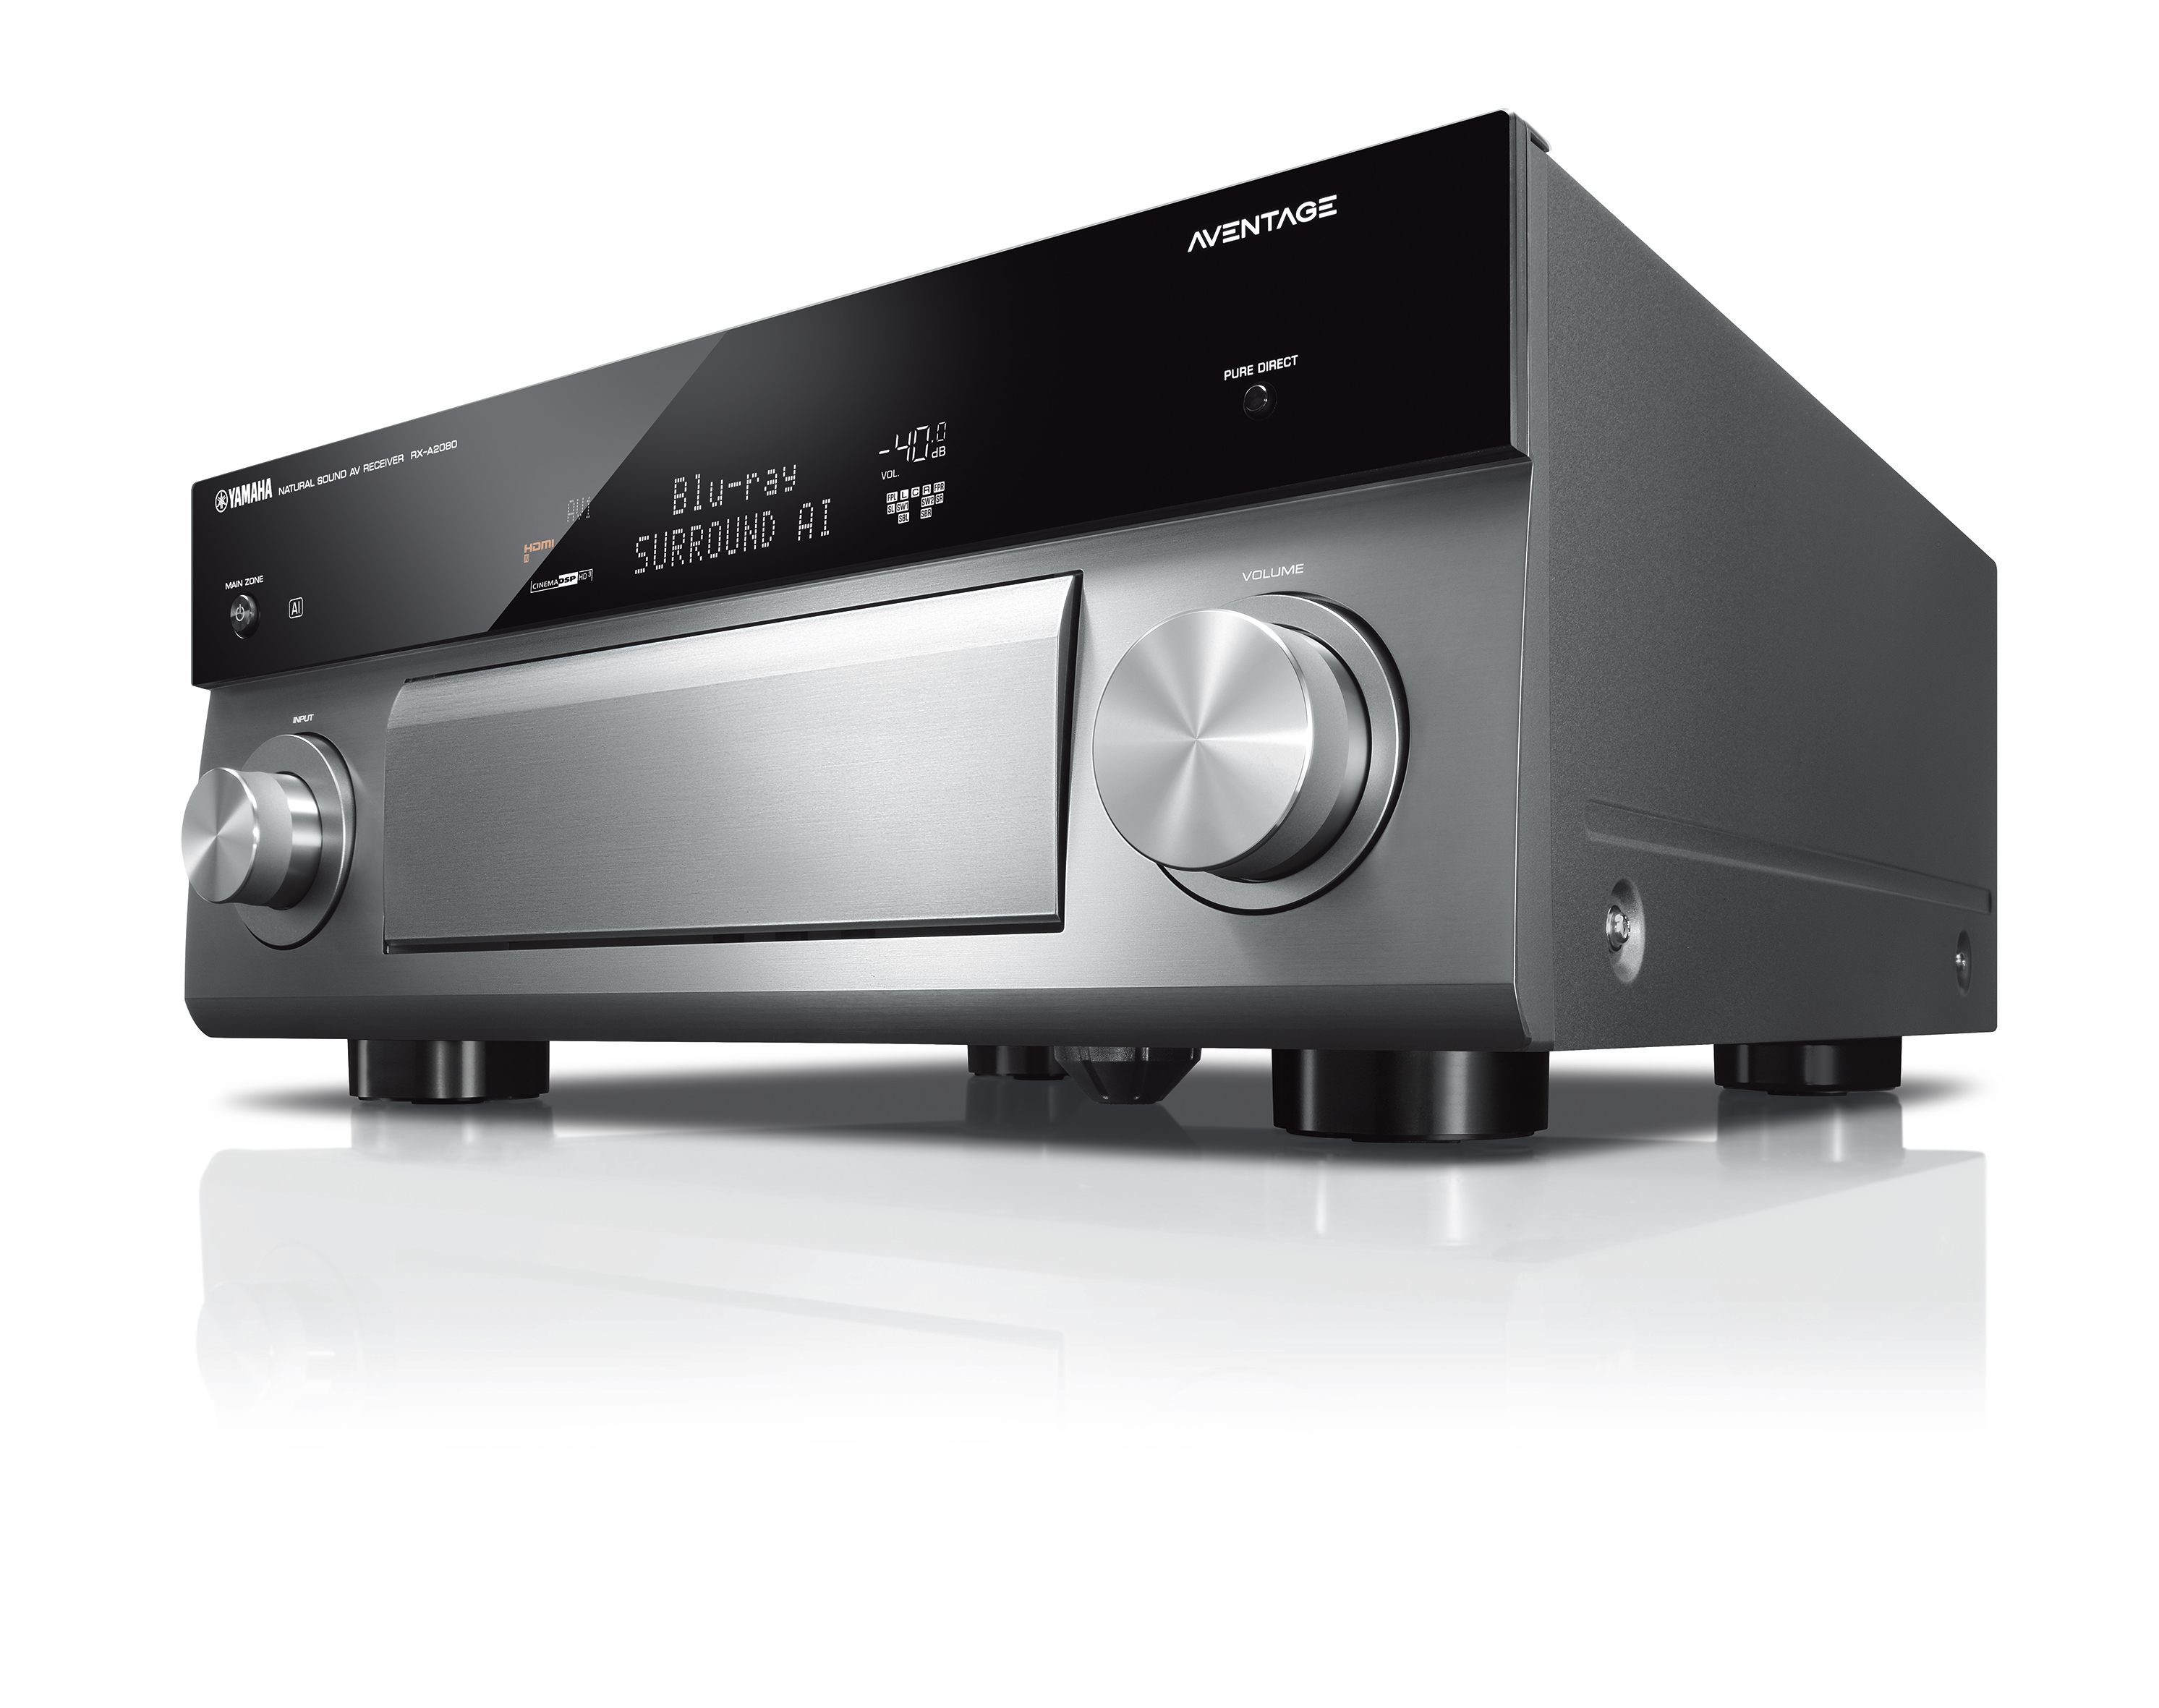 RX-A2080 - Overview - AV Receivers - Audio & Visual - Products 